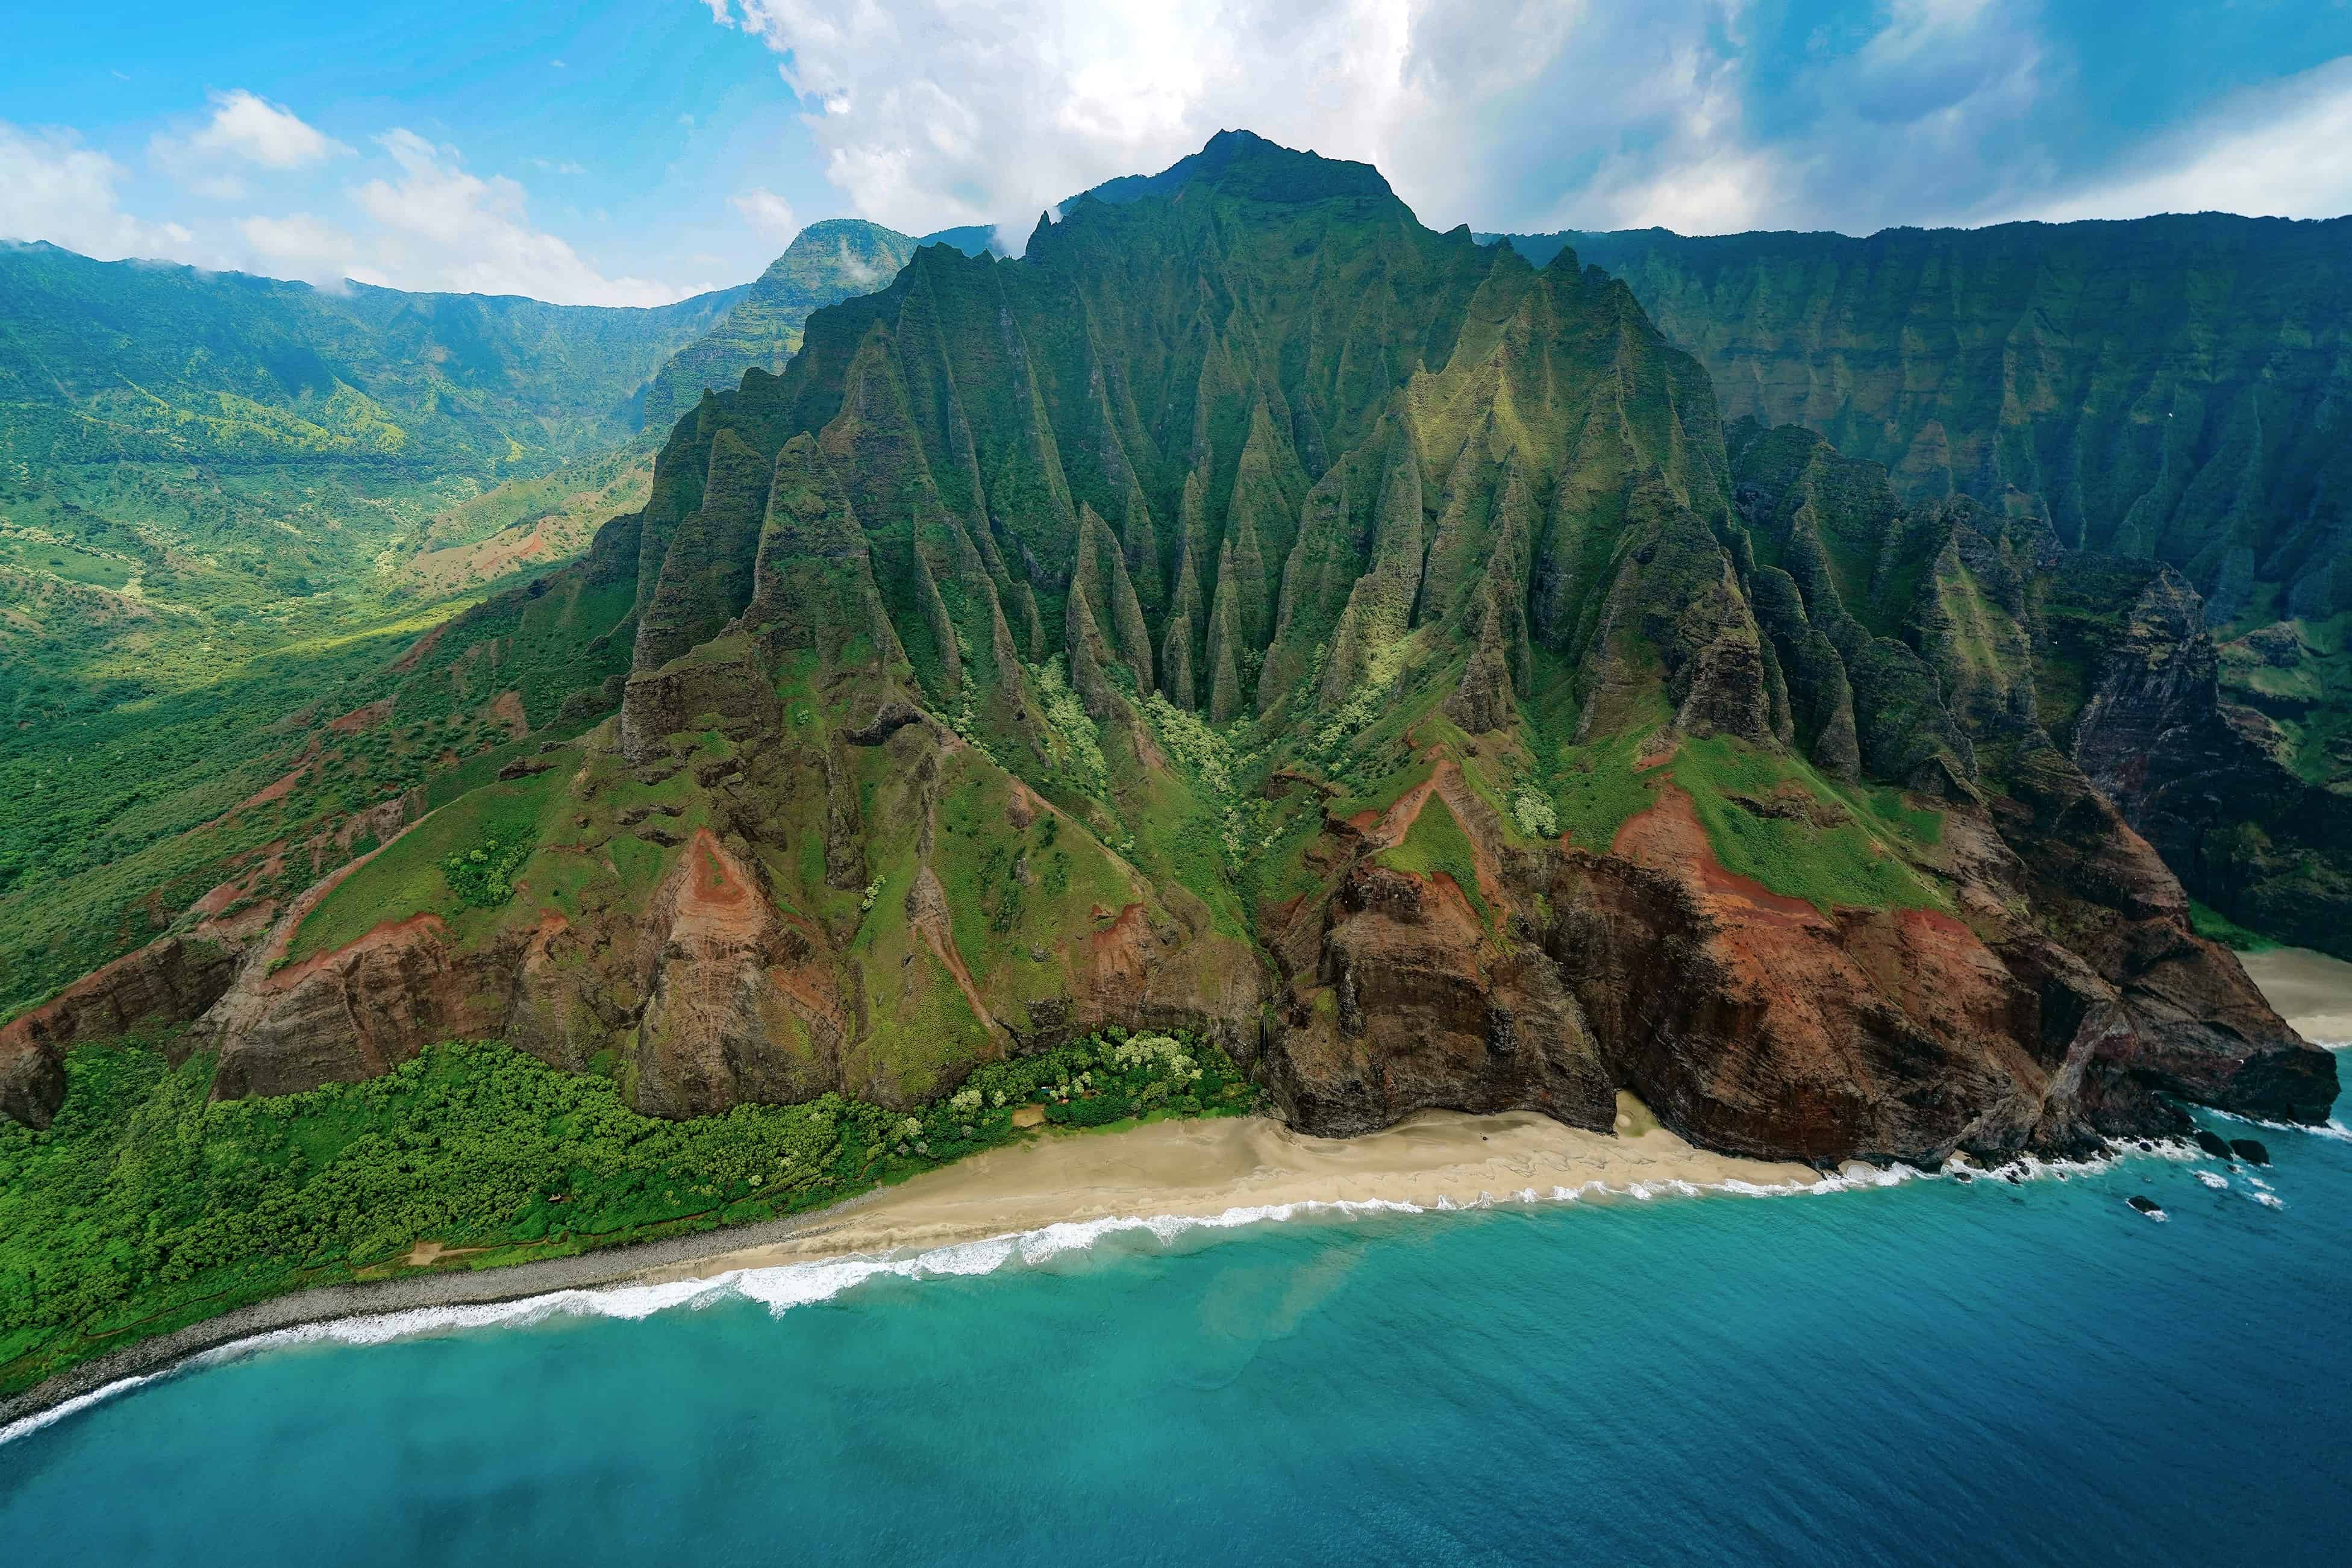 A stunning red mountain covered in lush greenery on the coast of an island.